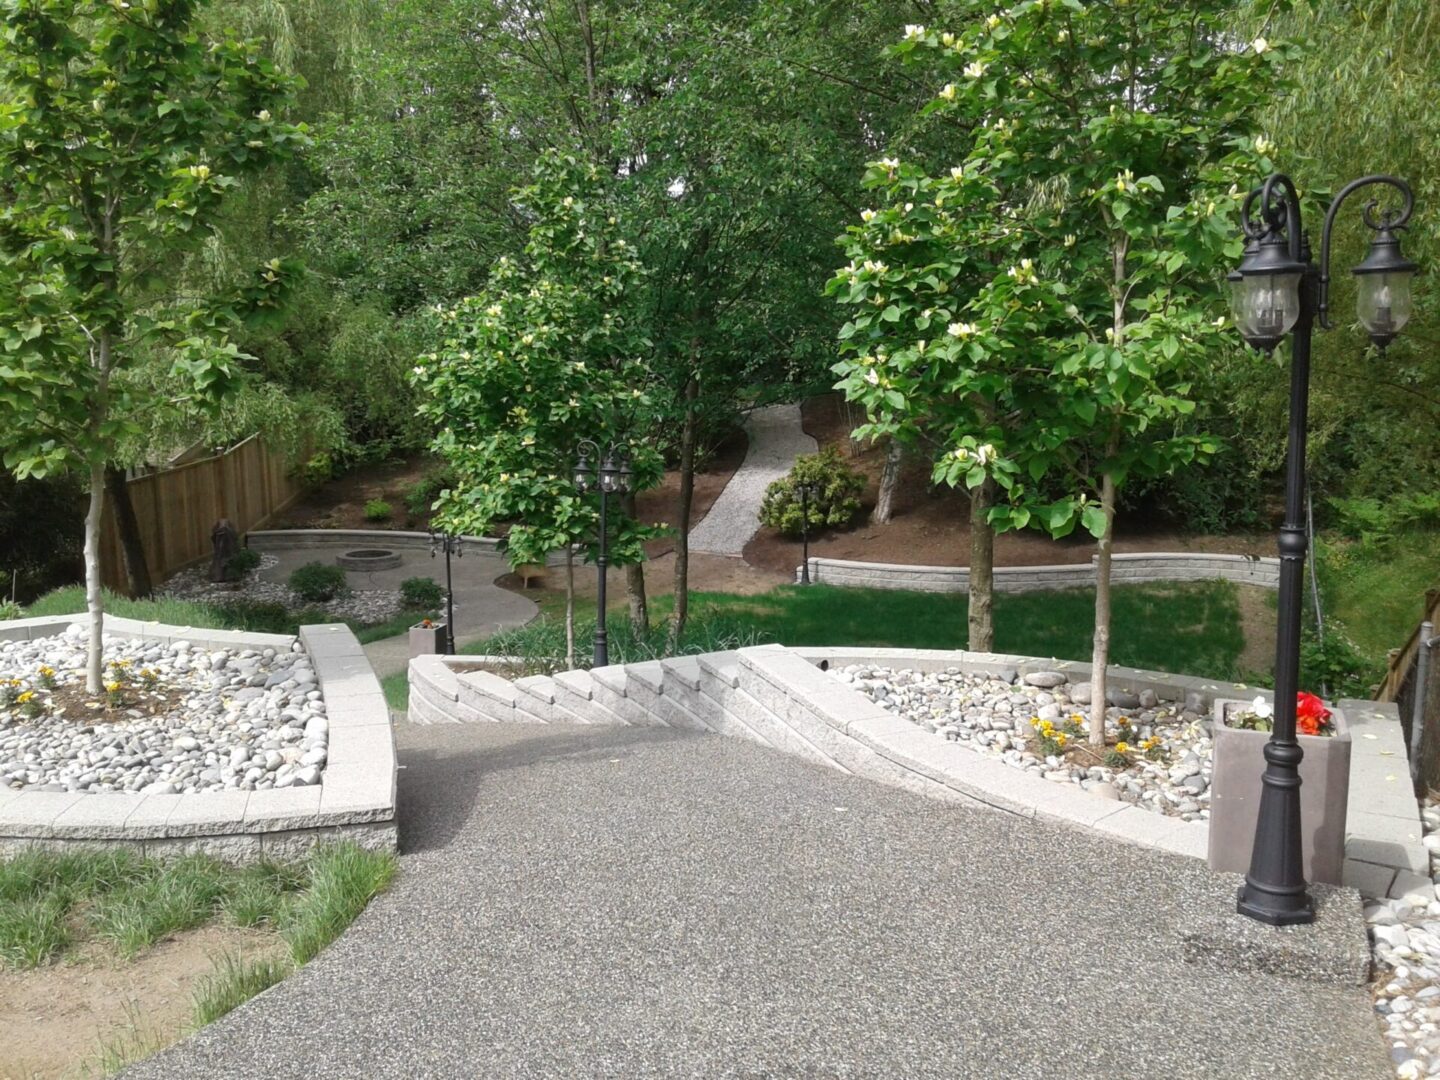 A paved pathway winding through a tranquil garden with young trees, white pebble borders, and lamp posts.